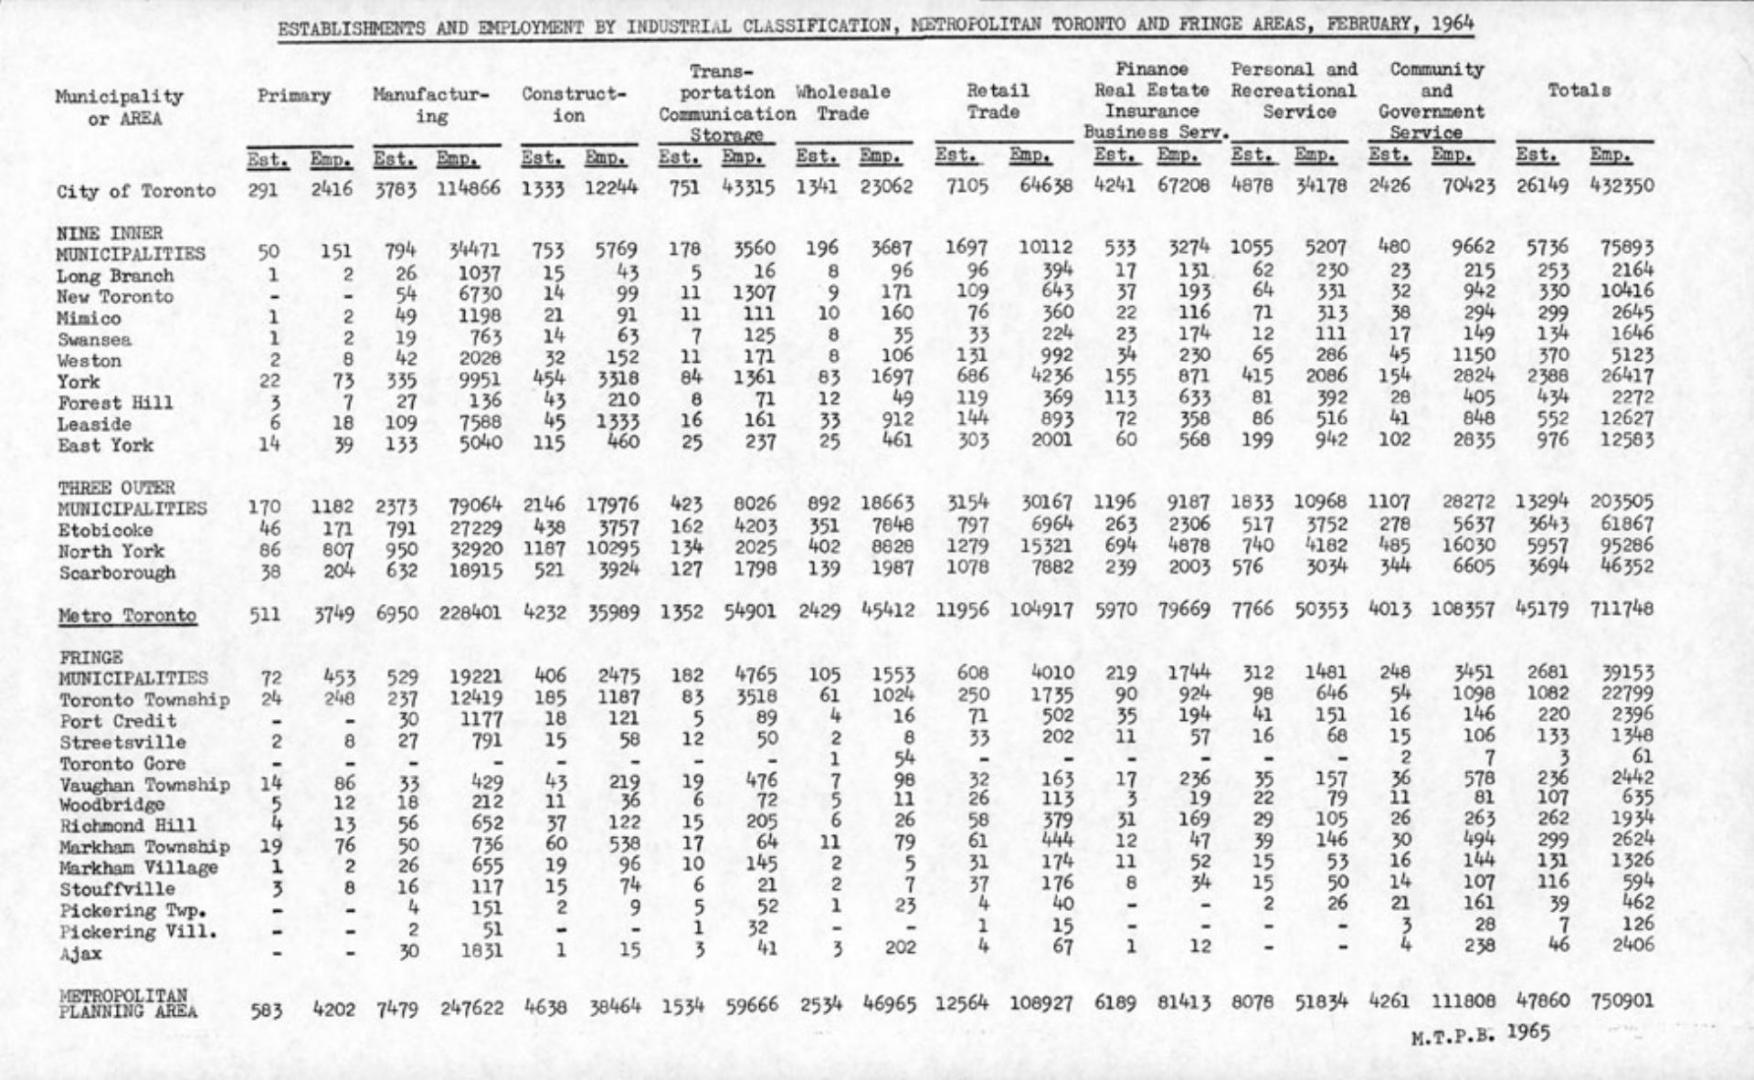 Establishments and employment by industrial classification, Metropolitan Toronto and fringe areas, February, 1964